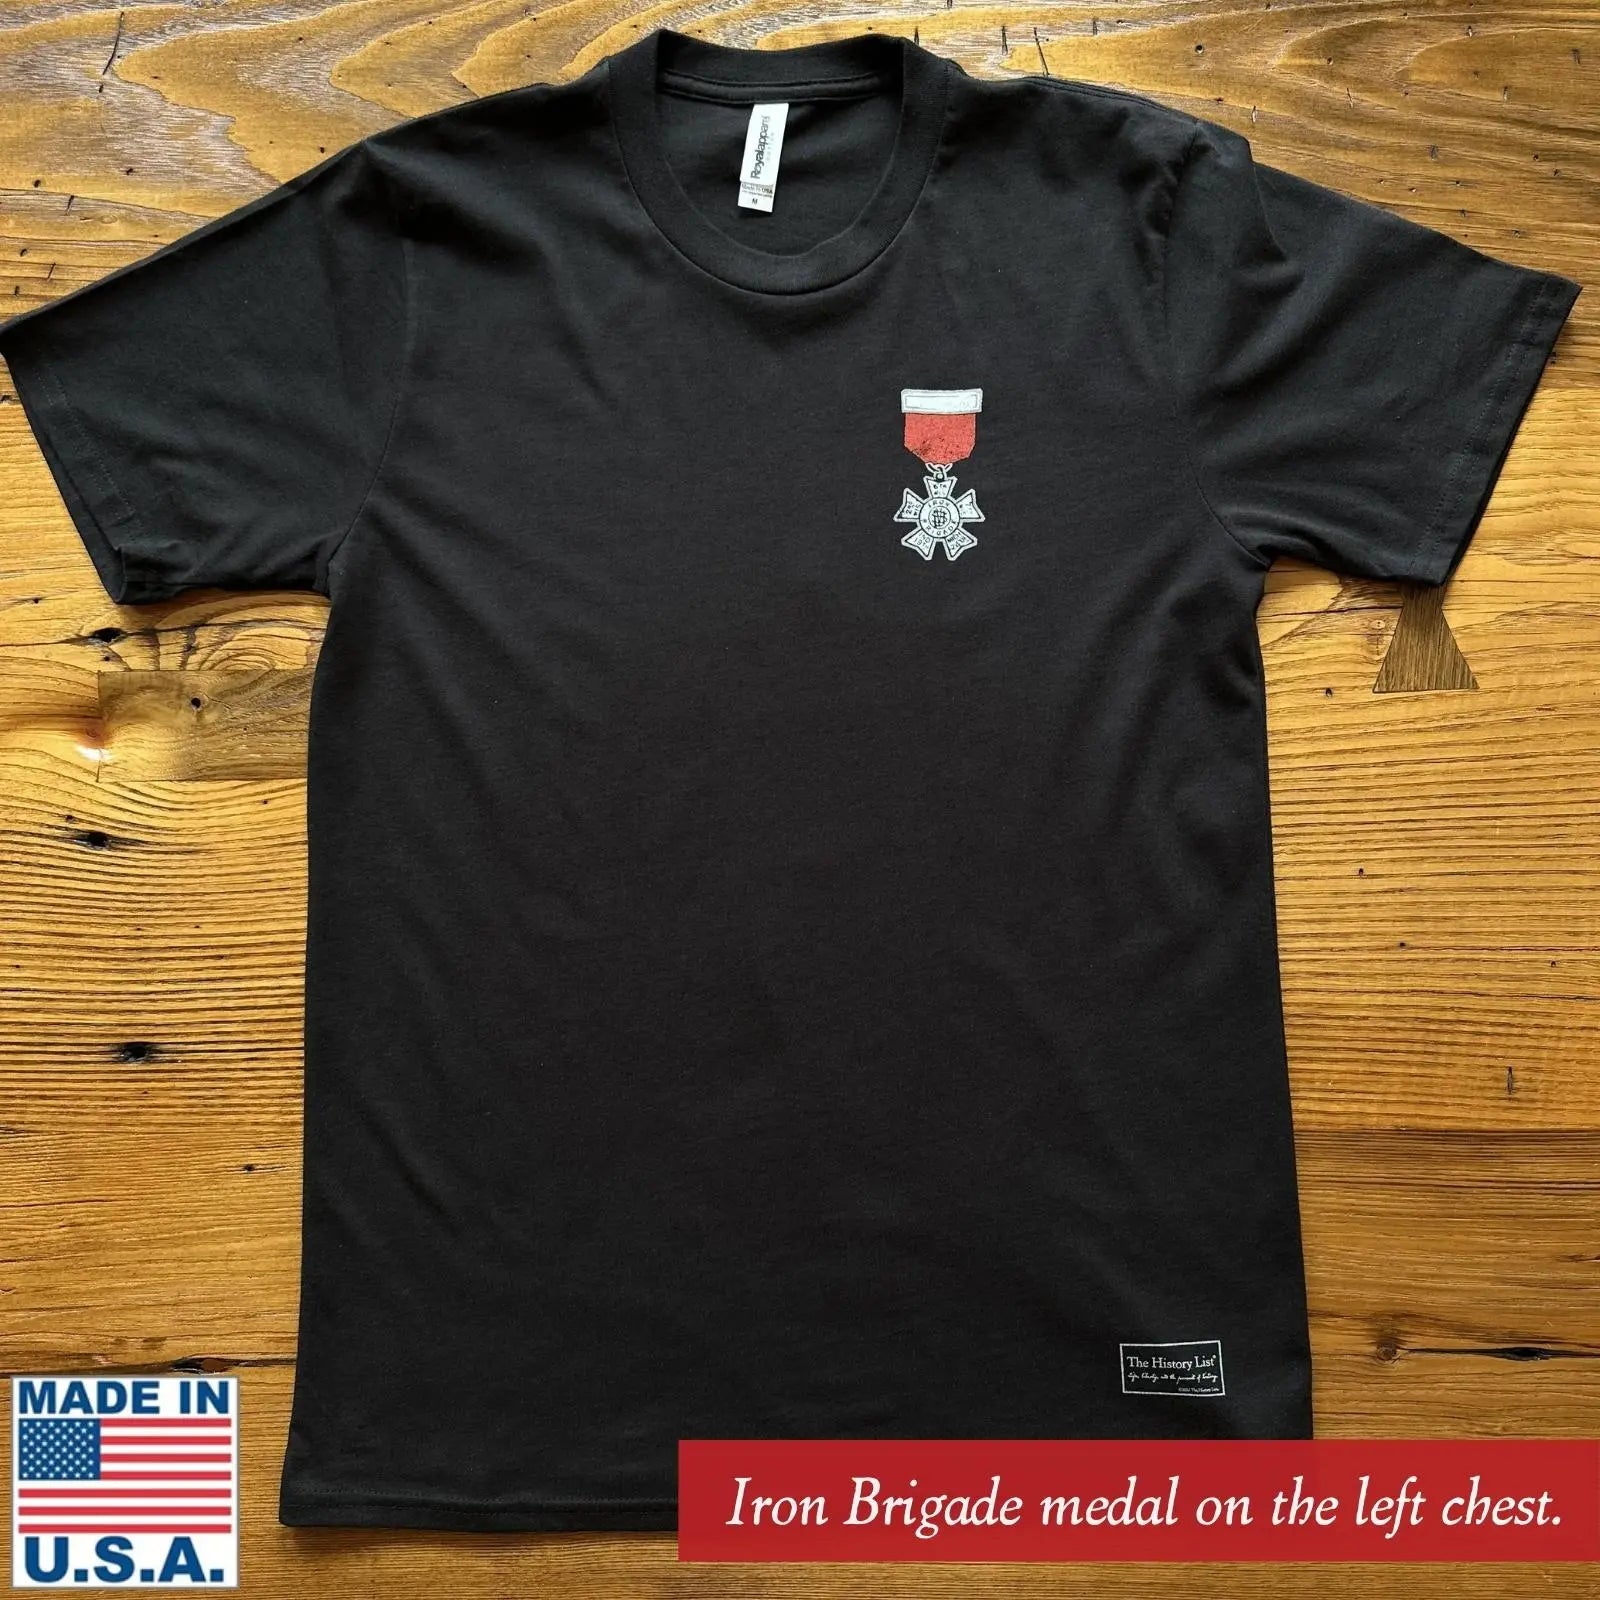 New front of The Civil War "Iron Brigade" Shirt Made in America from The History List store